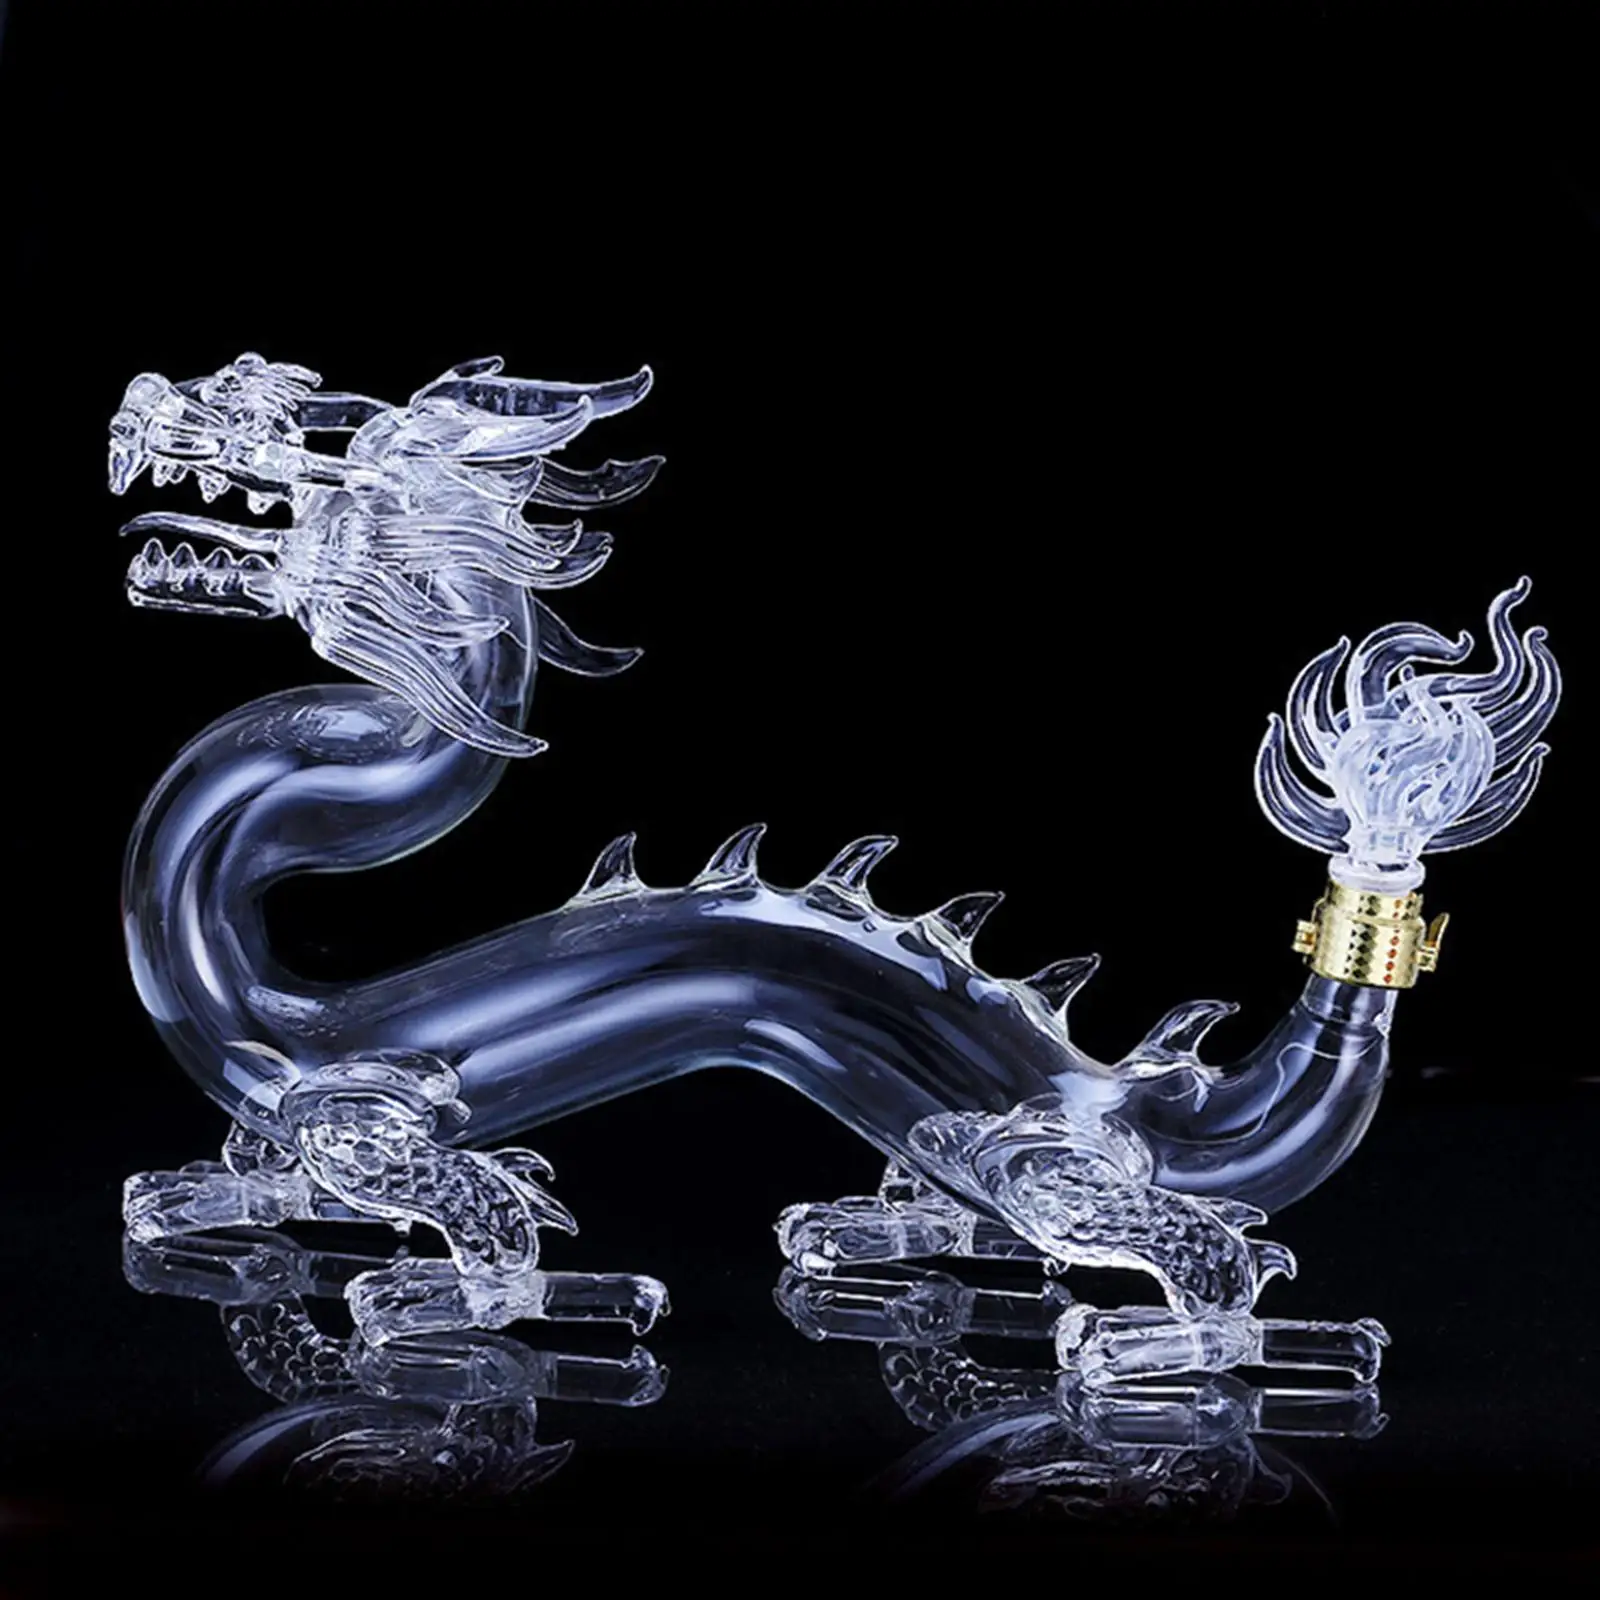 Whisky Decanter Glass Dragon Figurine Gifts Liquor Entertaining Barware Vodka Rum Tequila for Home Restaurant Bar Dining Adults